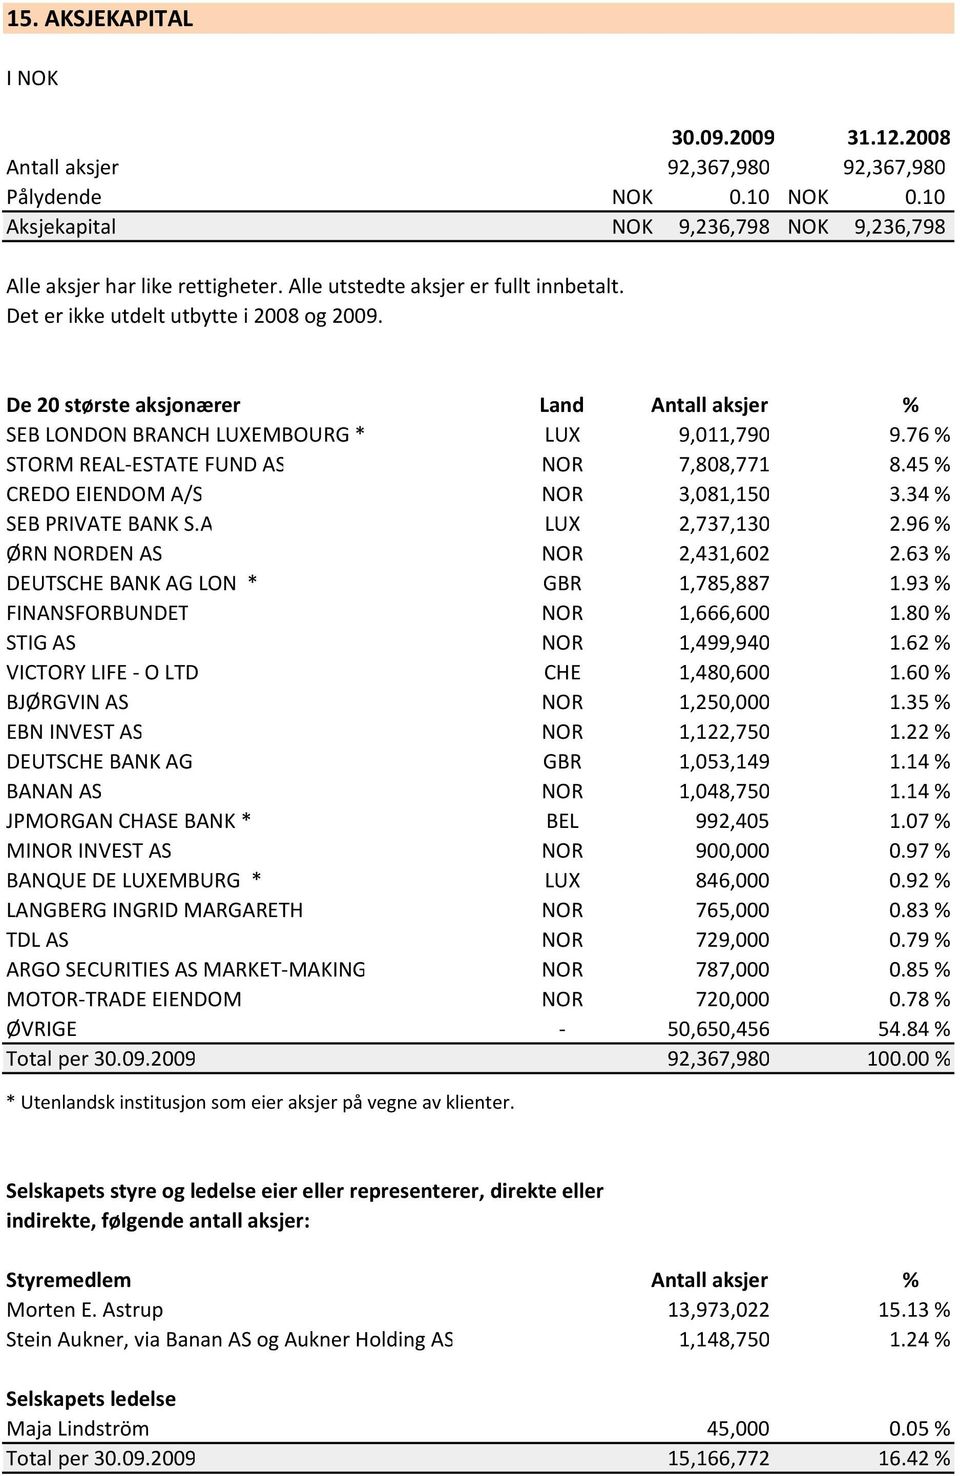 76 % STORM REAL ESTATE FUND AS NOR 7,808,771 8.45 % CREDO EIENDOM A/S NOR 3,081,150 3.34 % SEB PRIVATE BANK S.A LUX 2,737,130 2.96 % ØRN NORDEN AS NOR 2,431,602 2.